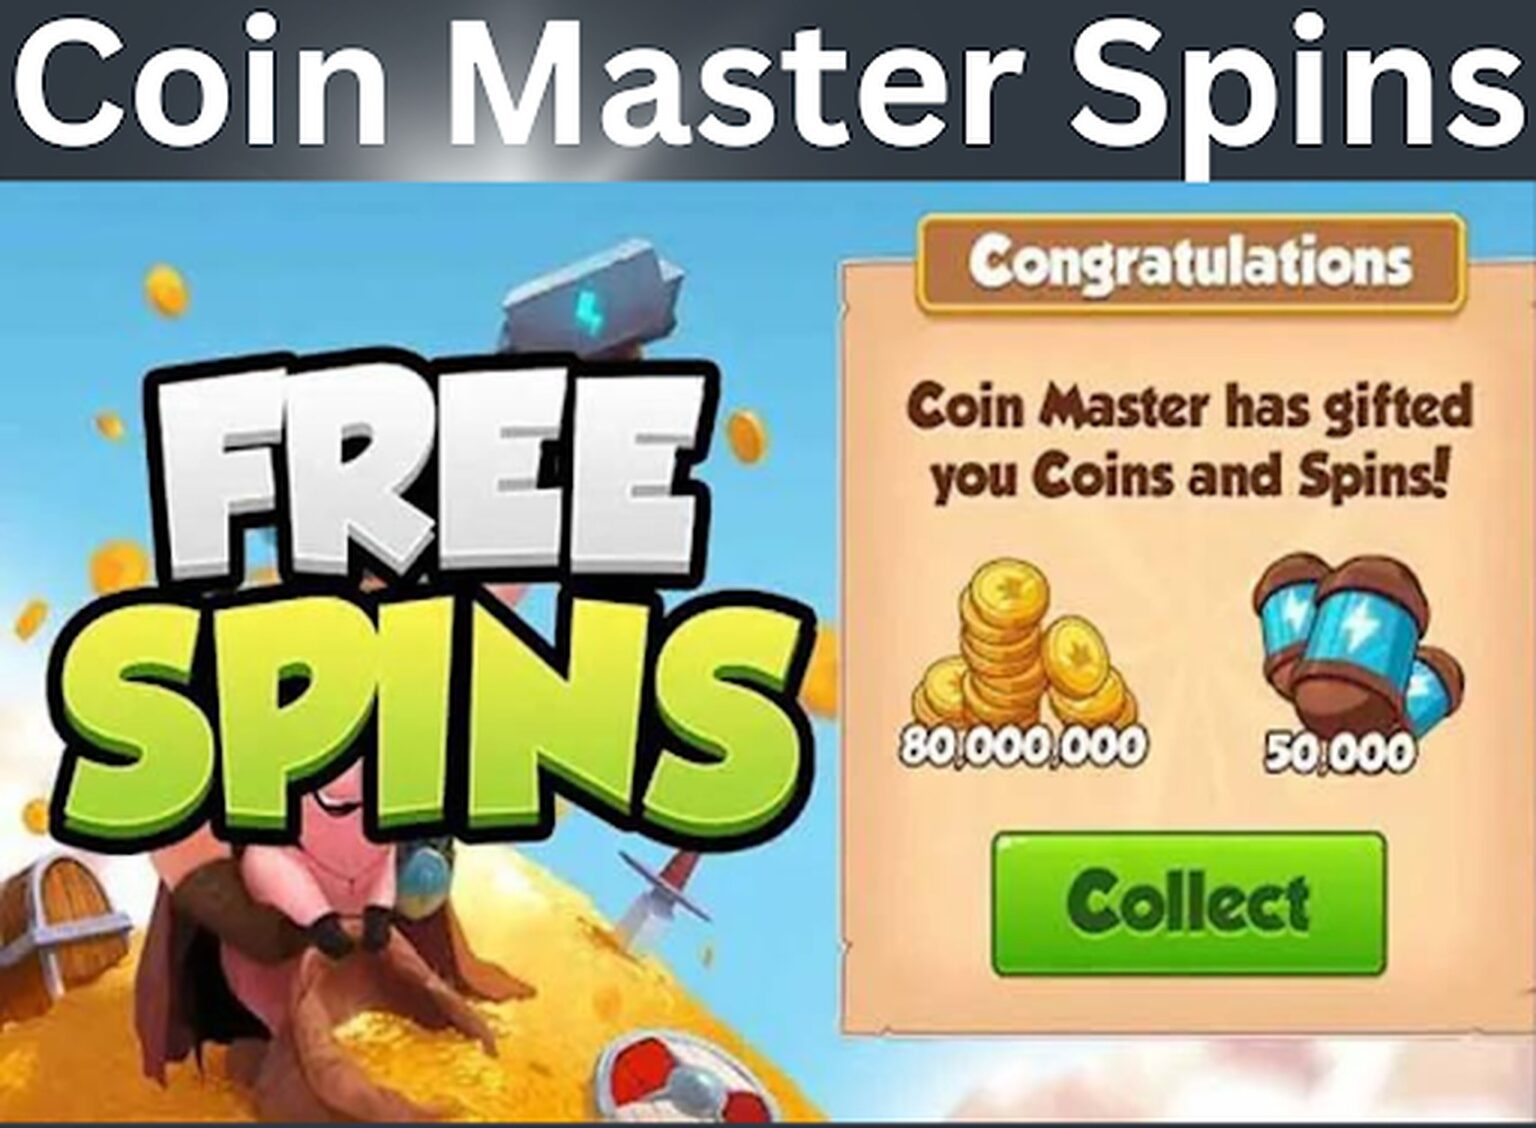 Free spins and coins are currently making Coin Master a hot topic amongst the casino crowd. Take a look at how you can get your free stuff now!